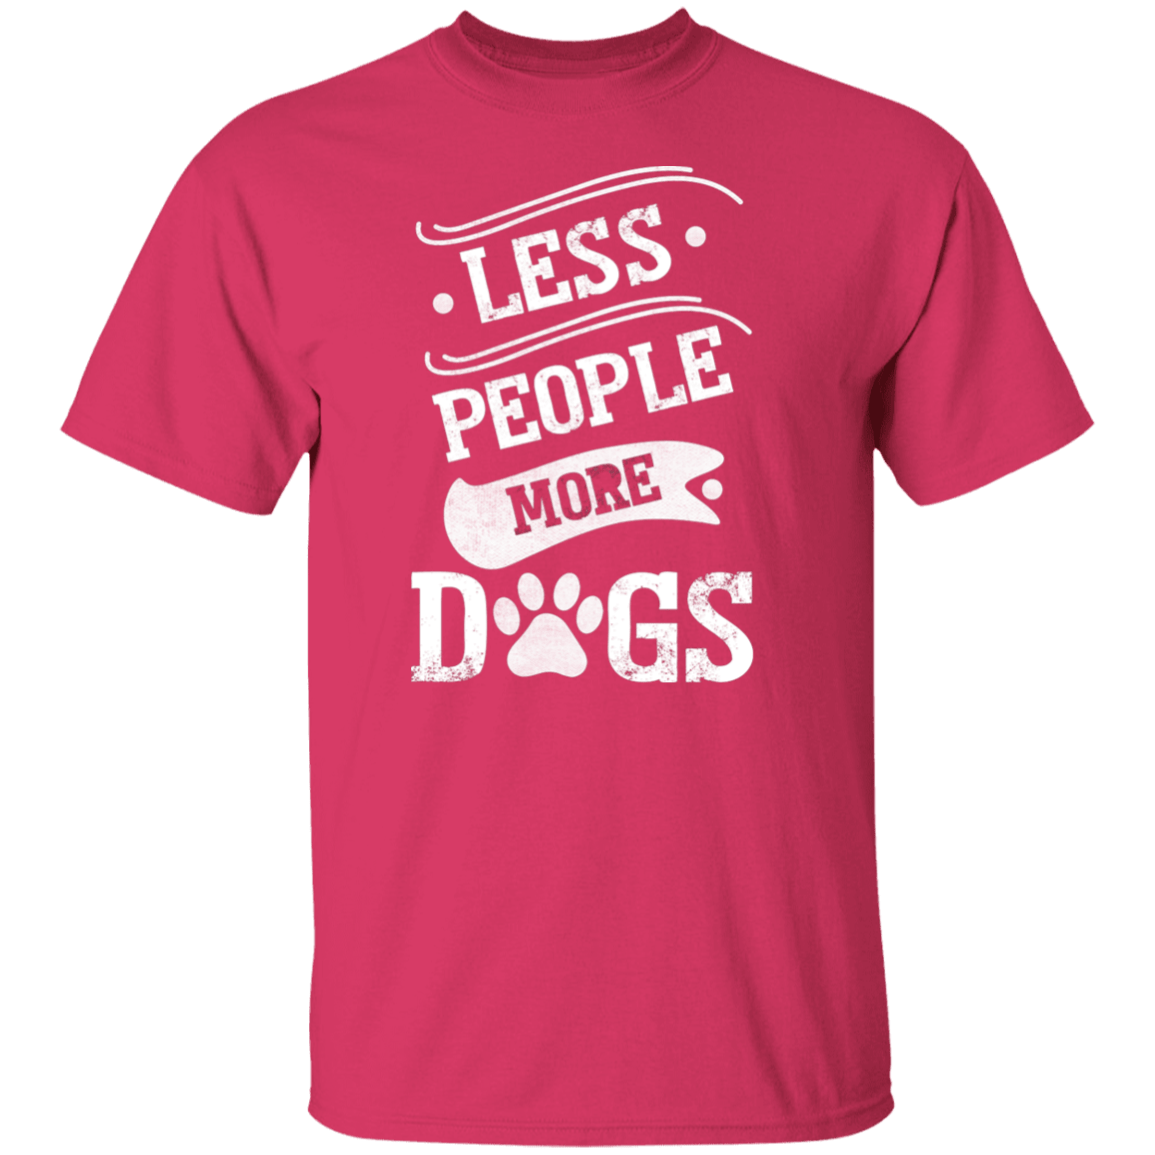 Less People More Dogs - T Shirt.